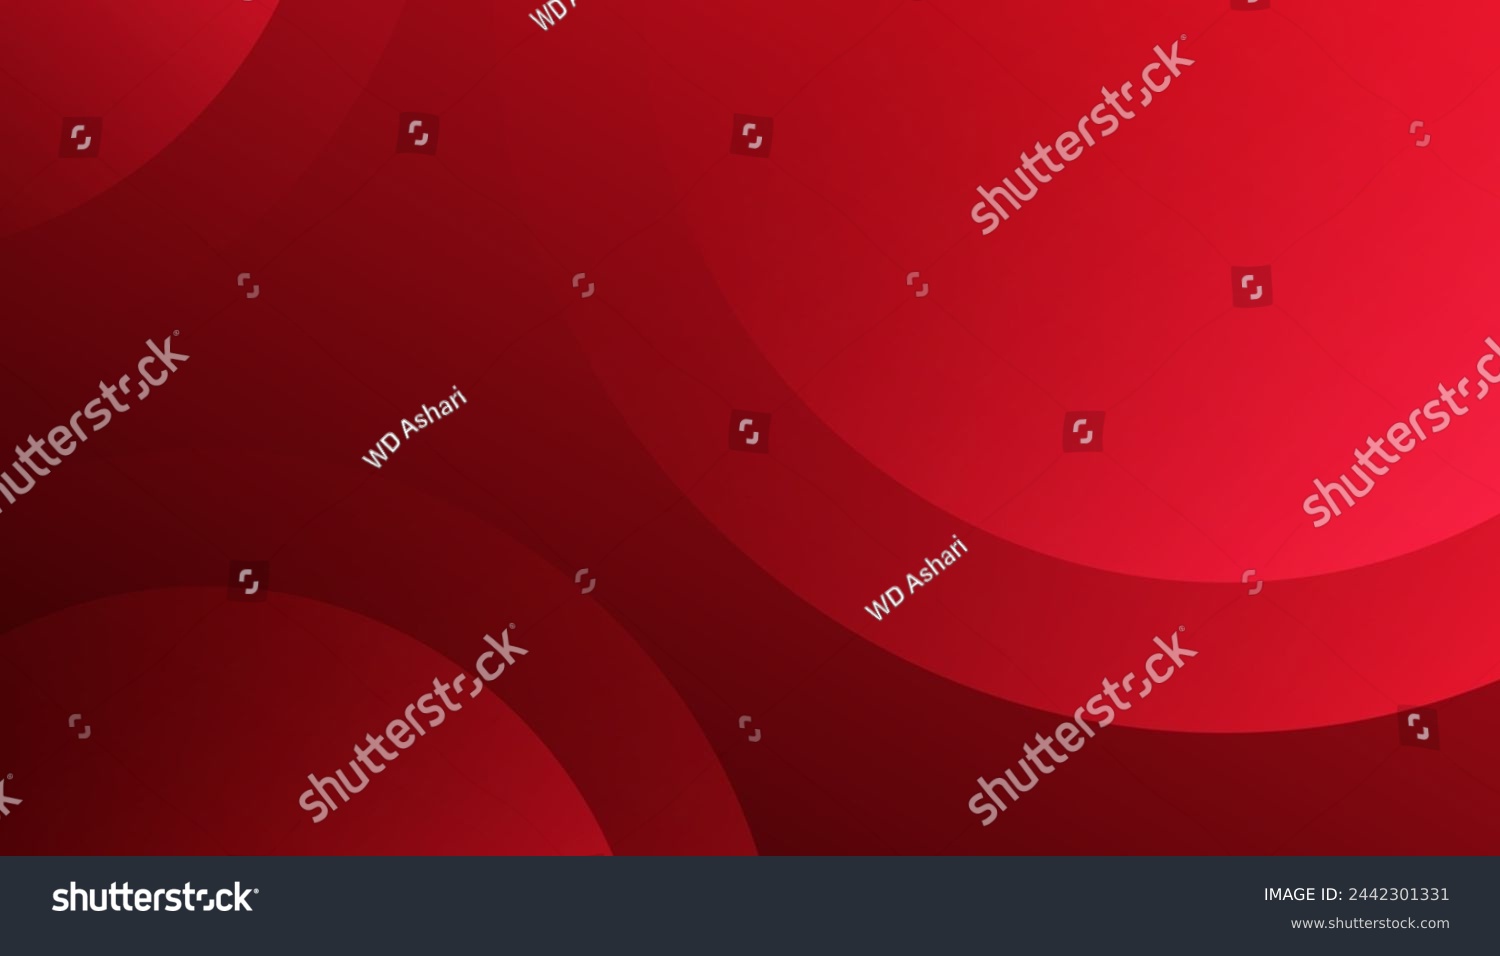 SVG of Abstract red background.   Modern and Creative Trend design in vector illustration
 svg